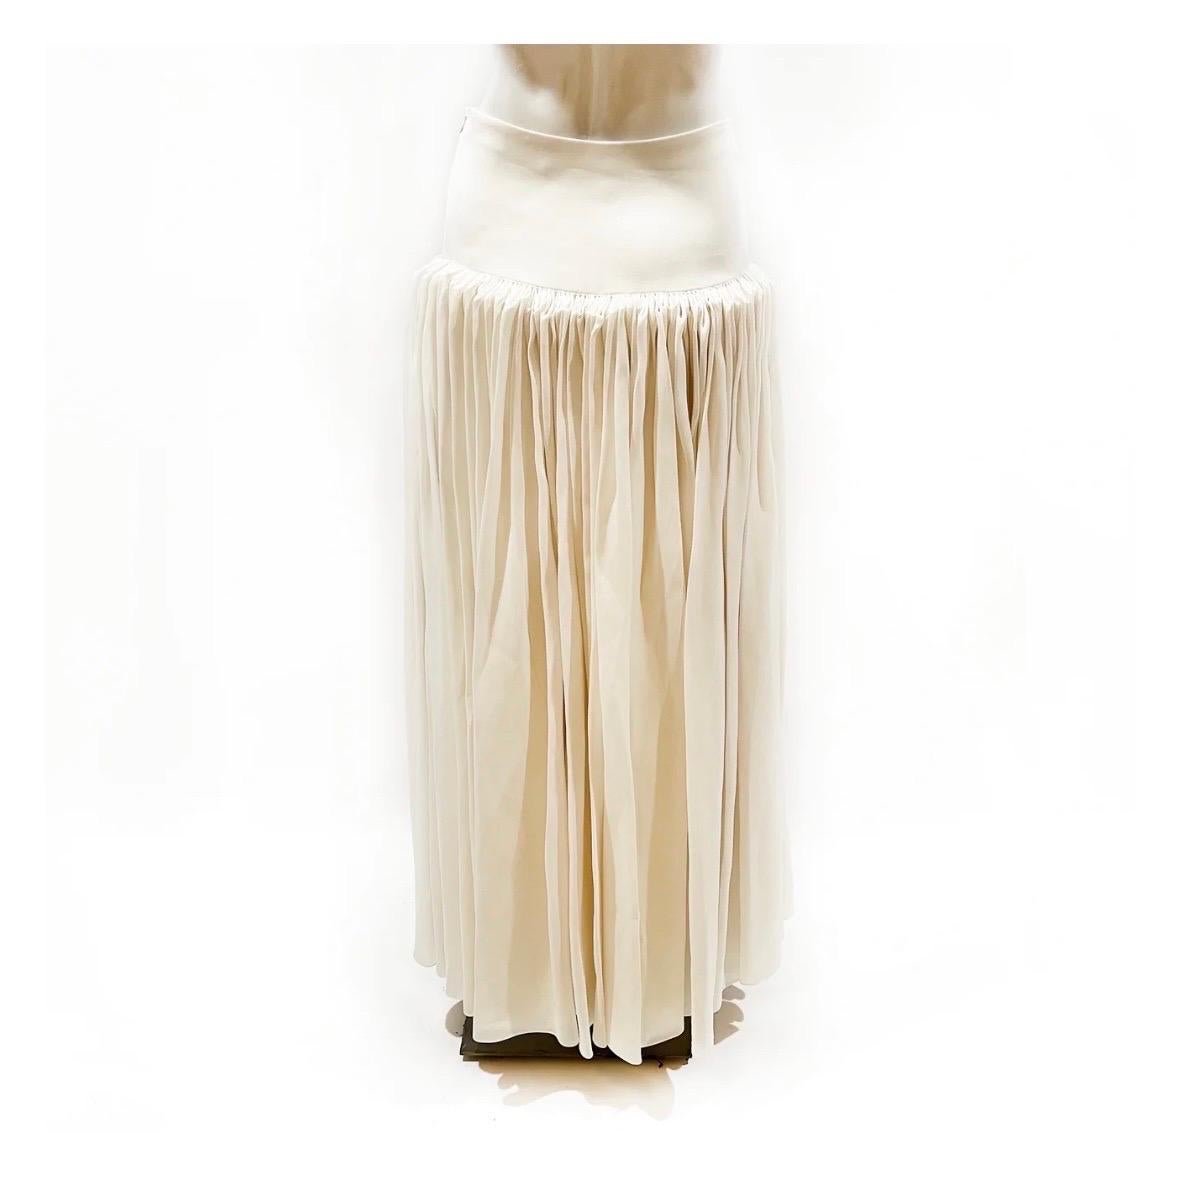 Pleated maxi skirt by The Row
Fall 2018 Ready-to-Wear
Made in USA
Ivory 
Drop waist
Dramatic accordion style pleating 
Side zipper and hook closure
100% silk  
Condition: Excellent; zero signs of wear.  
Size/Measurements:
Size 2
28